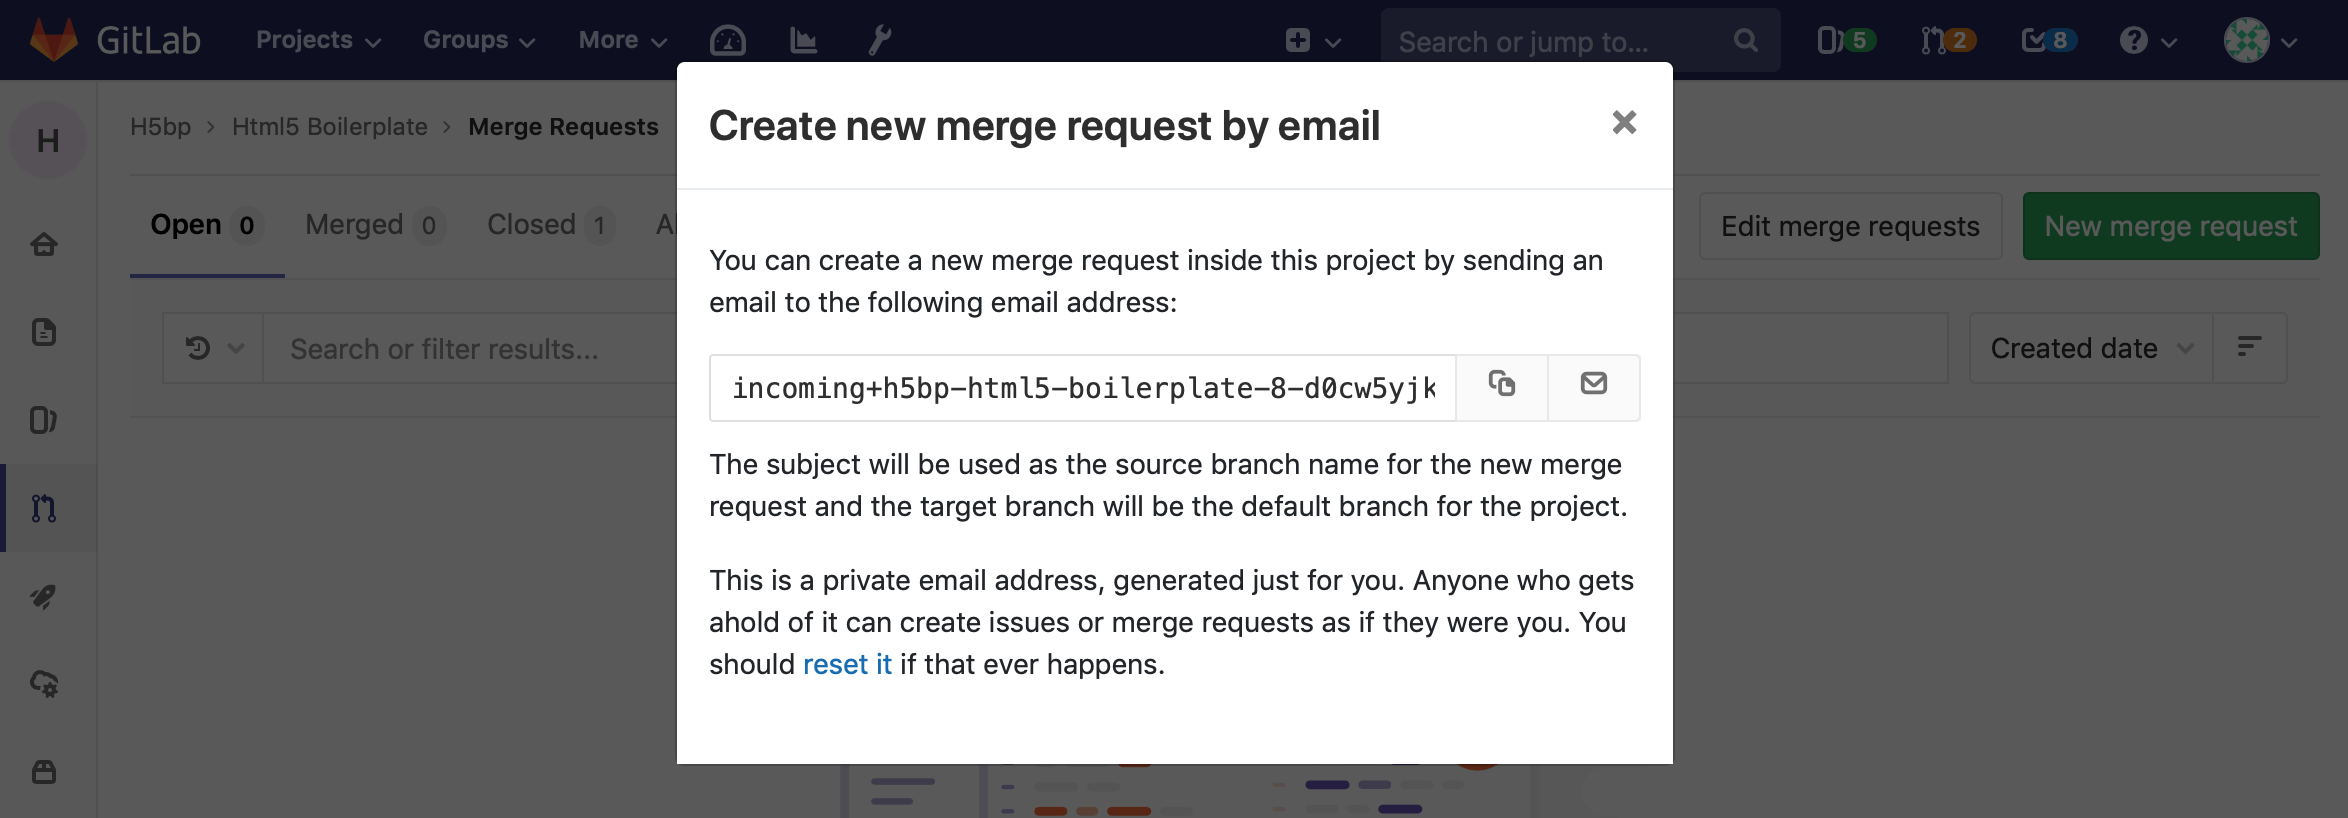 Create new merge requests by email